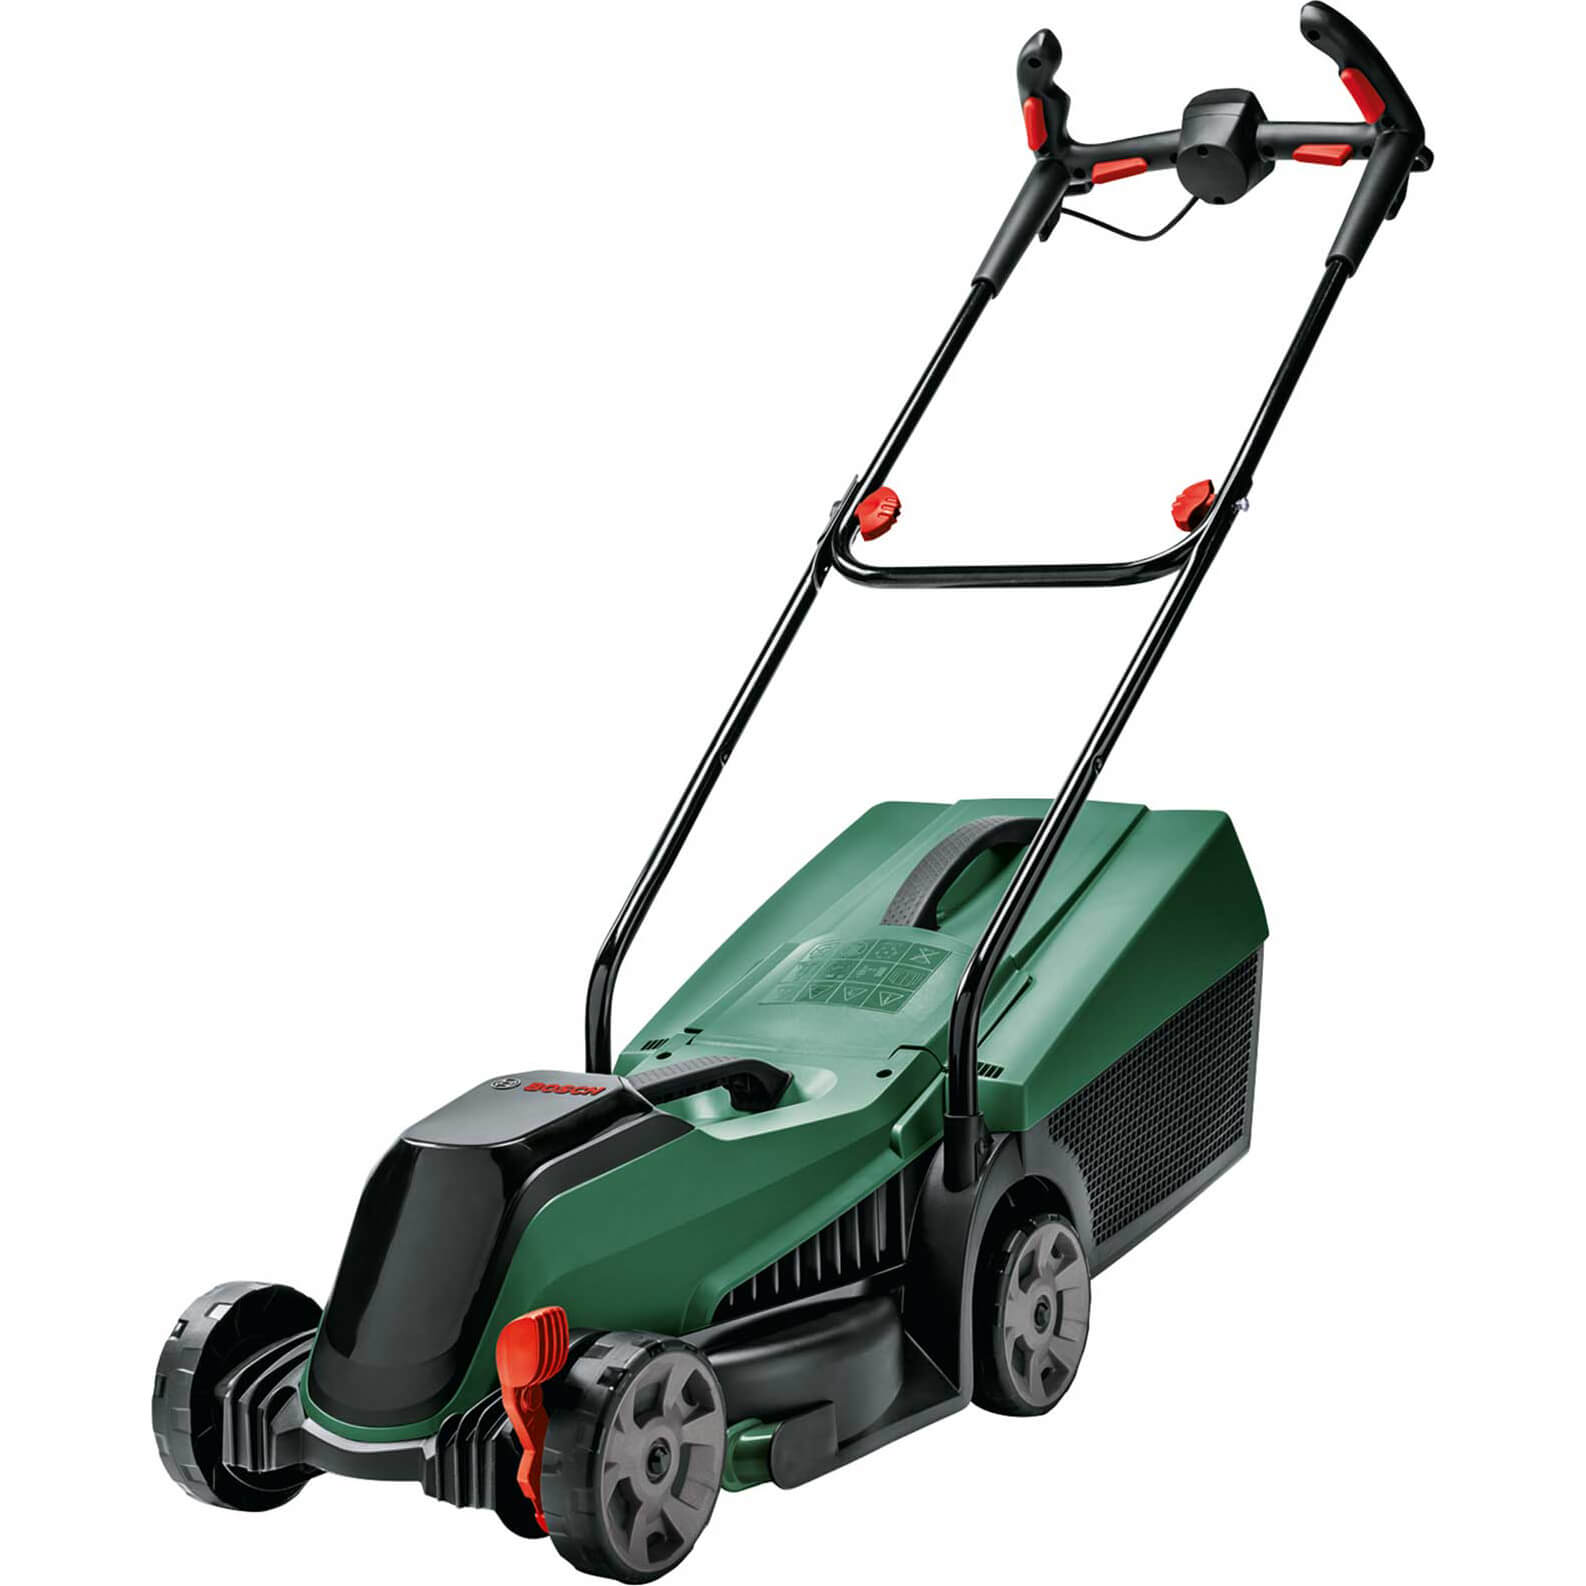 Bosch CITYMOWER 18-32 P4A 18v Cordless Rotary Lawnmower 320mm No Batteries No Charger